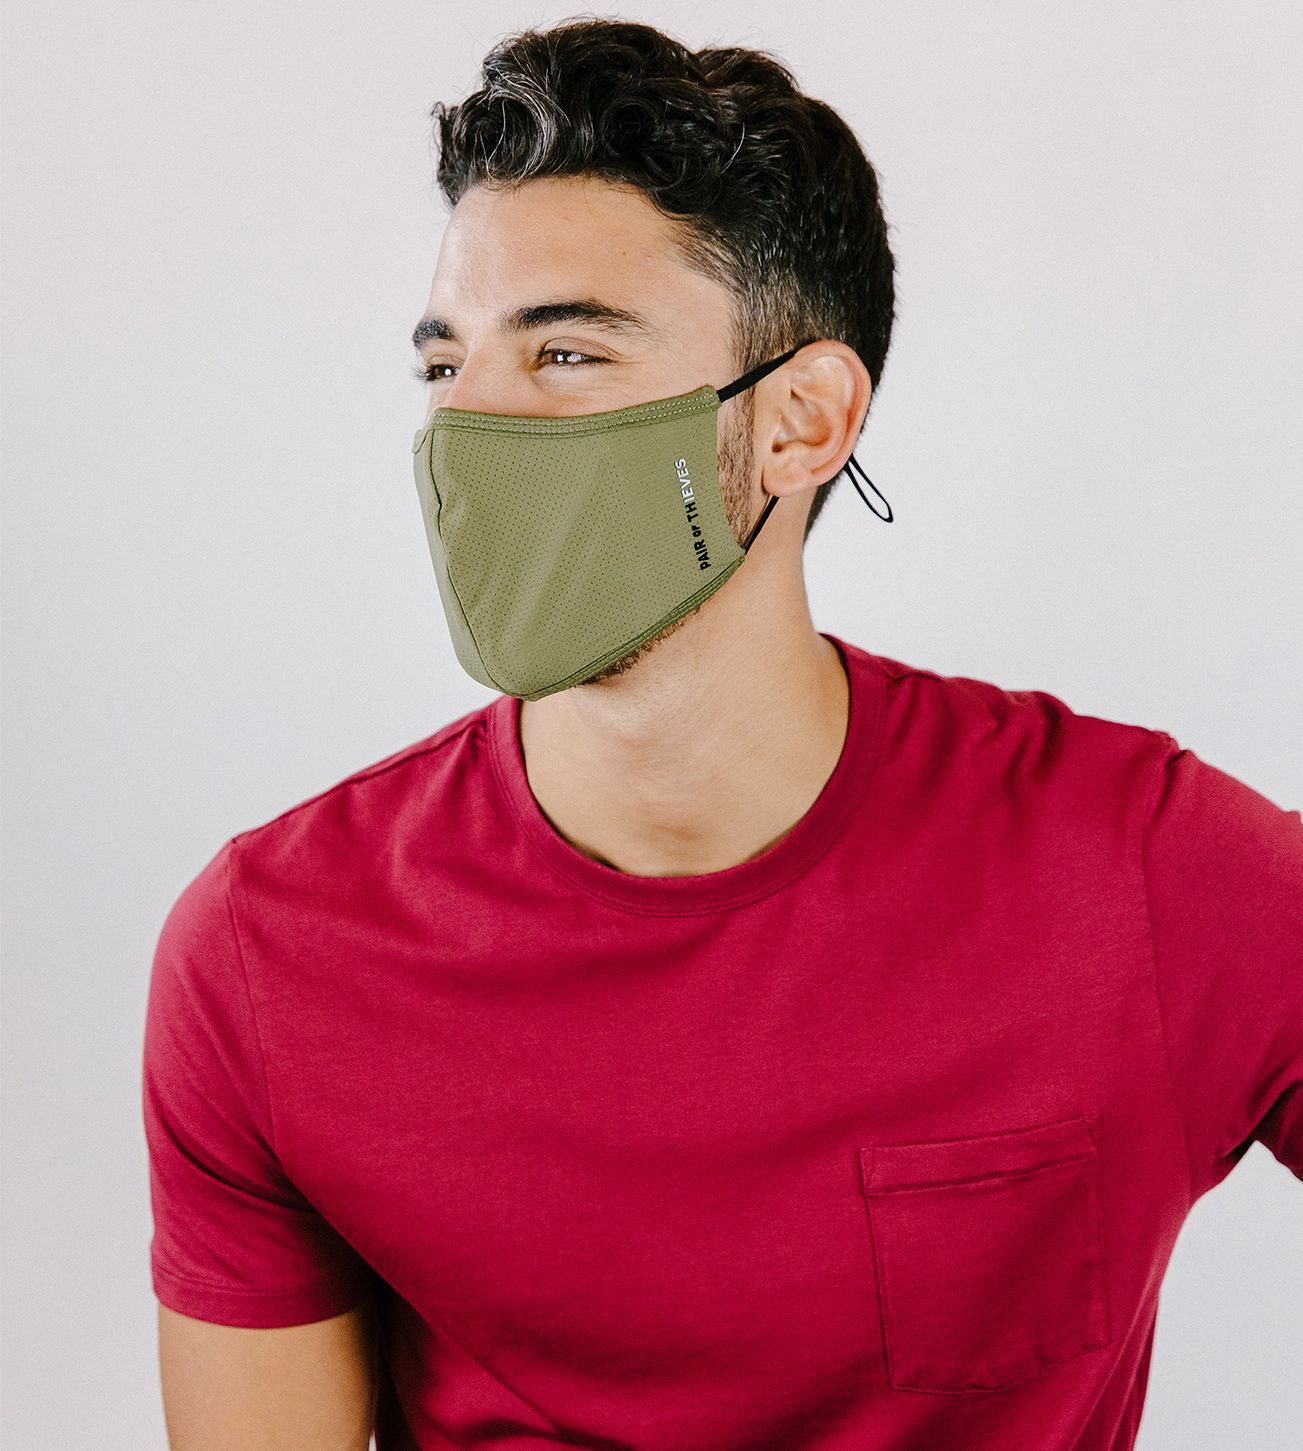 Assorted Reusable Masks 3 Pack contains colors Black, Light Gray, Fire brick, Gray, Tan, Fire brick, Gains boro, Dark olive green, Indian red, Maroon